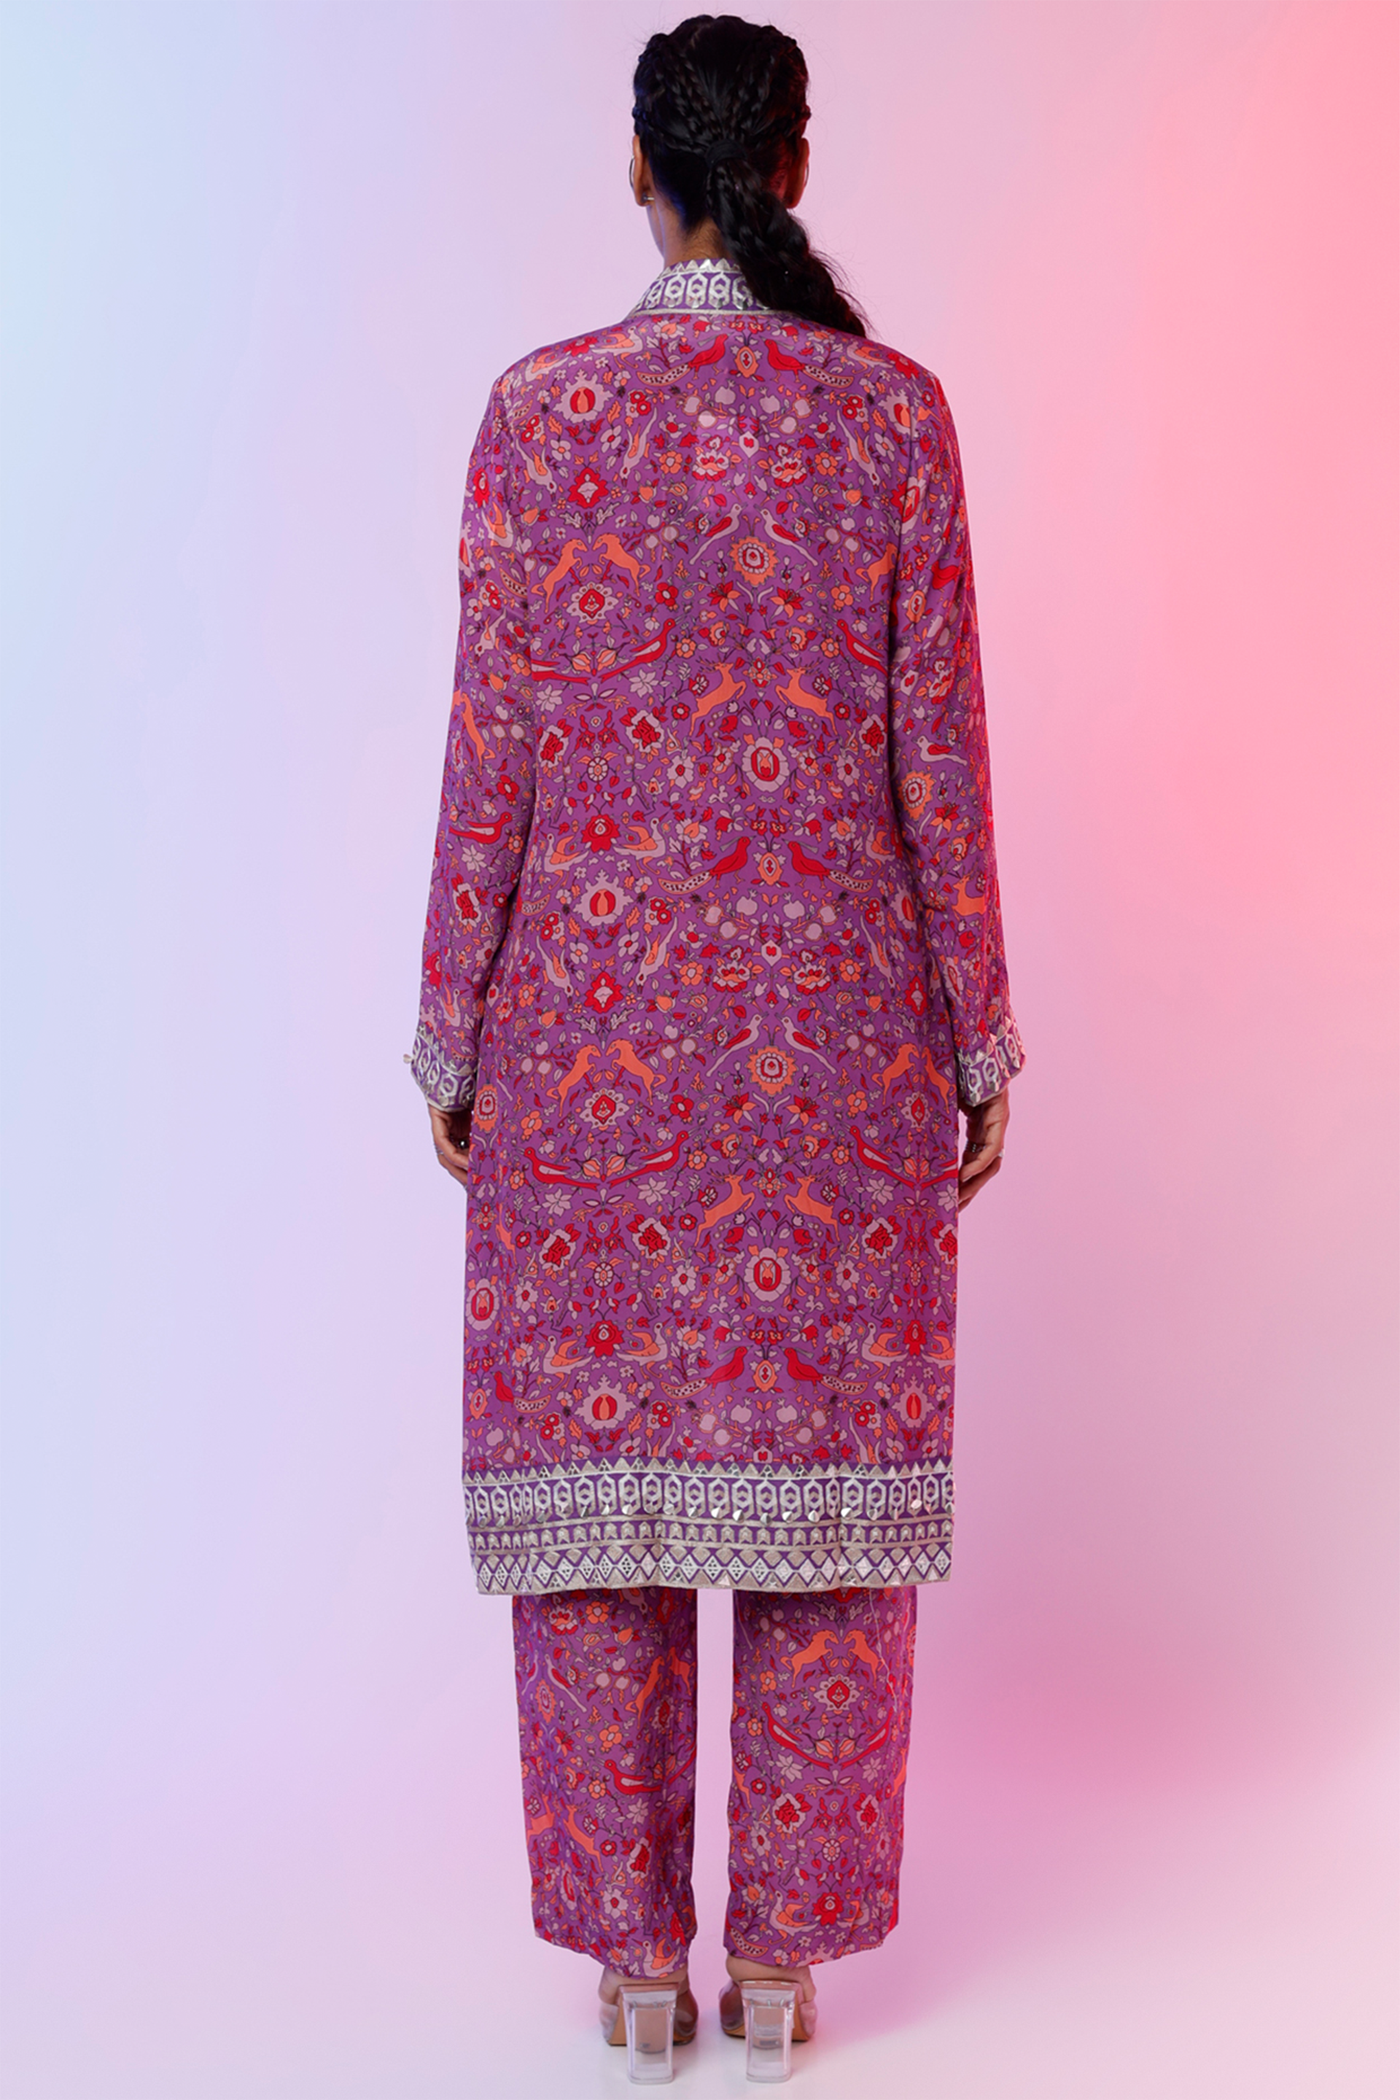 sva by sonam and paras modi Purple Saanjh Camisole And Pants Teamed With An Embellished Printed Jacket  Festive fusion Indian designer wear online shopping melange singapore indian designer wear